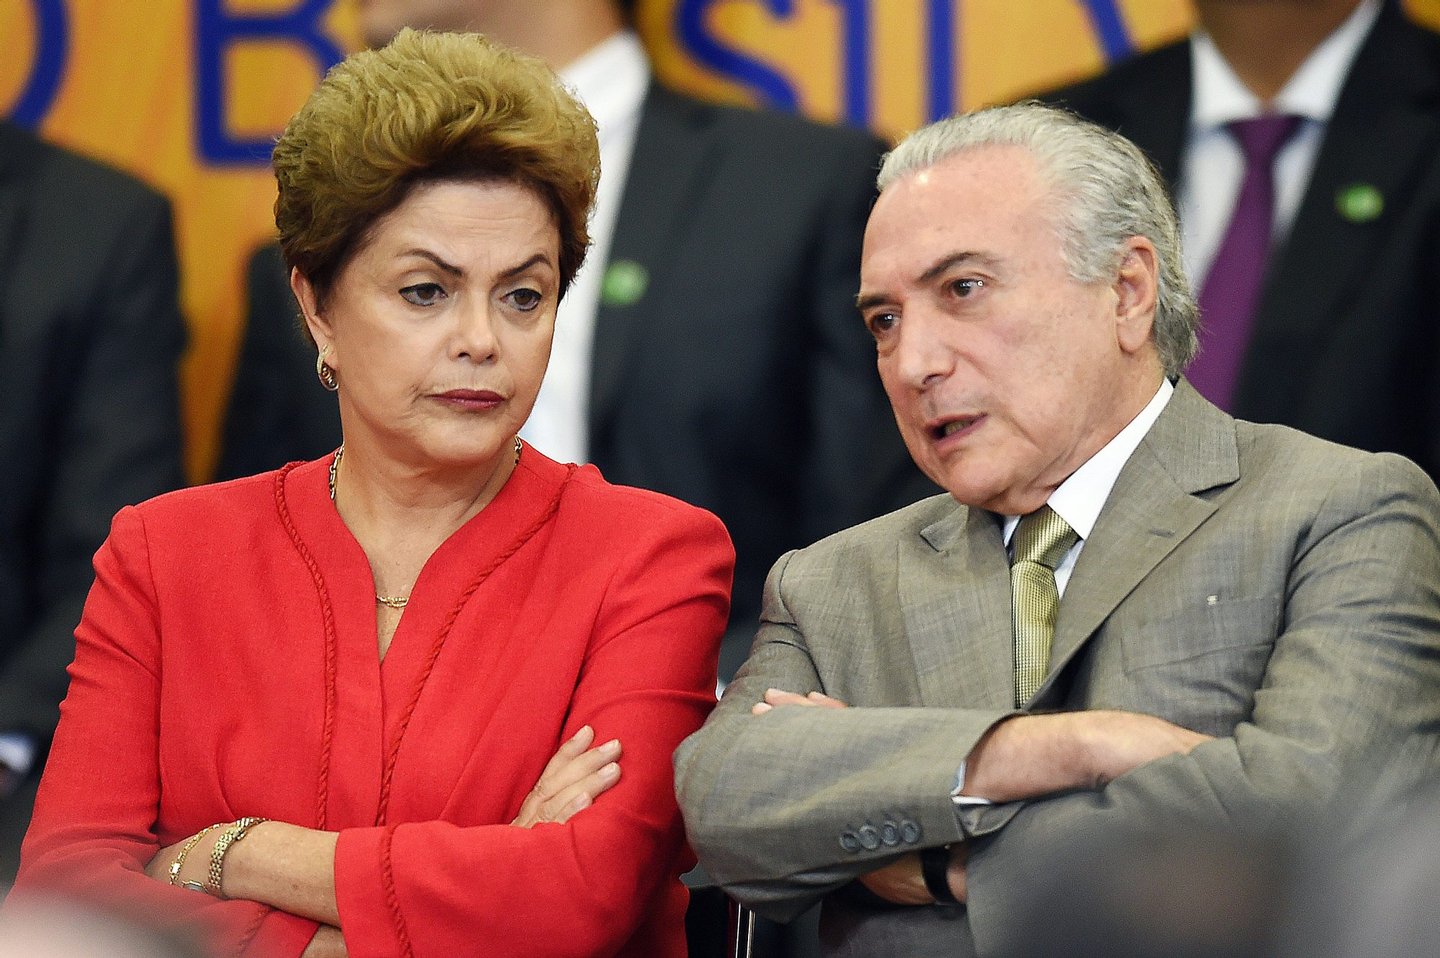 Brazilian President Dilma Rousseff and her vice President Michel Temer attend the launching ceremony of the Logistics Investment Program (LIP), at the Planalto Palace in Brasilia, on June 9, 2015. Brazil announced a $64-billion infrastructure spending package on Tuesday, hoping to revive its flagging economy with investment in highways, railroads, ports and airports. AFP PHOTO/EVARISTO SA (Photo credit should read EVARISTO SA/AFP/Getty Images)